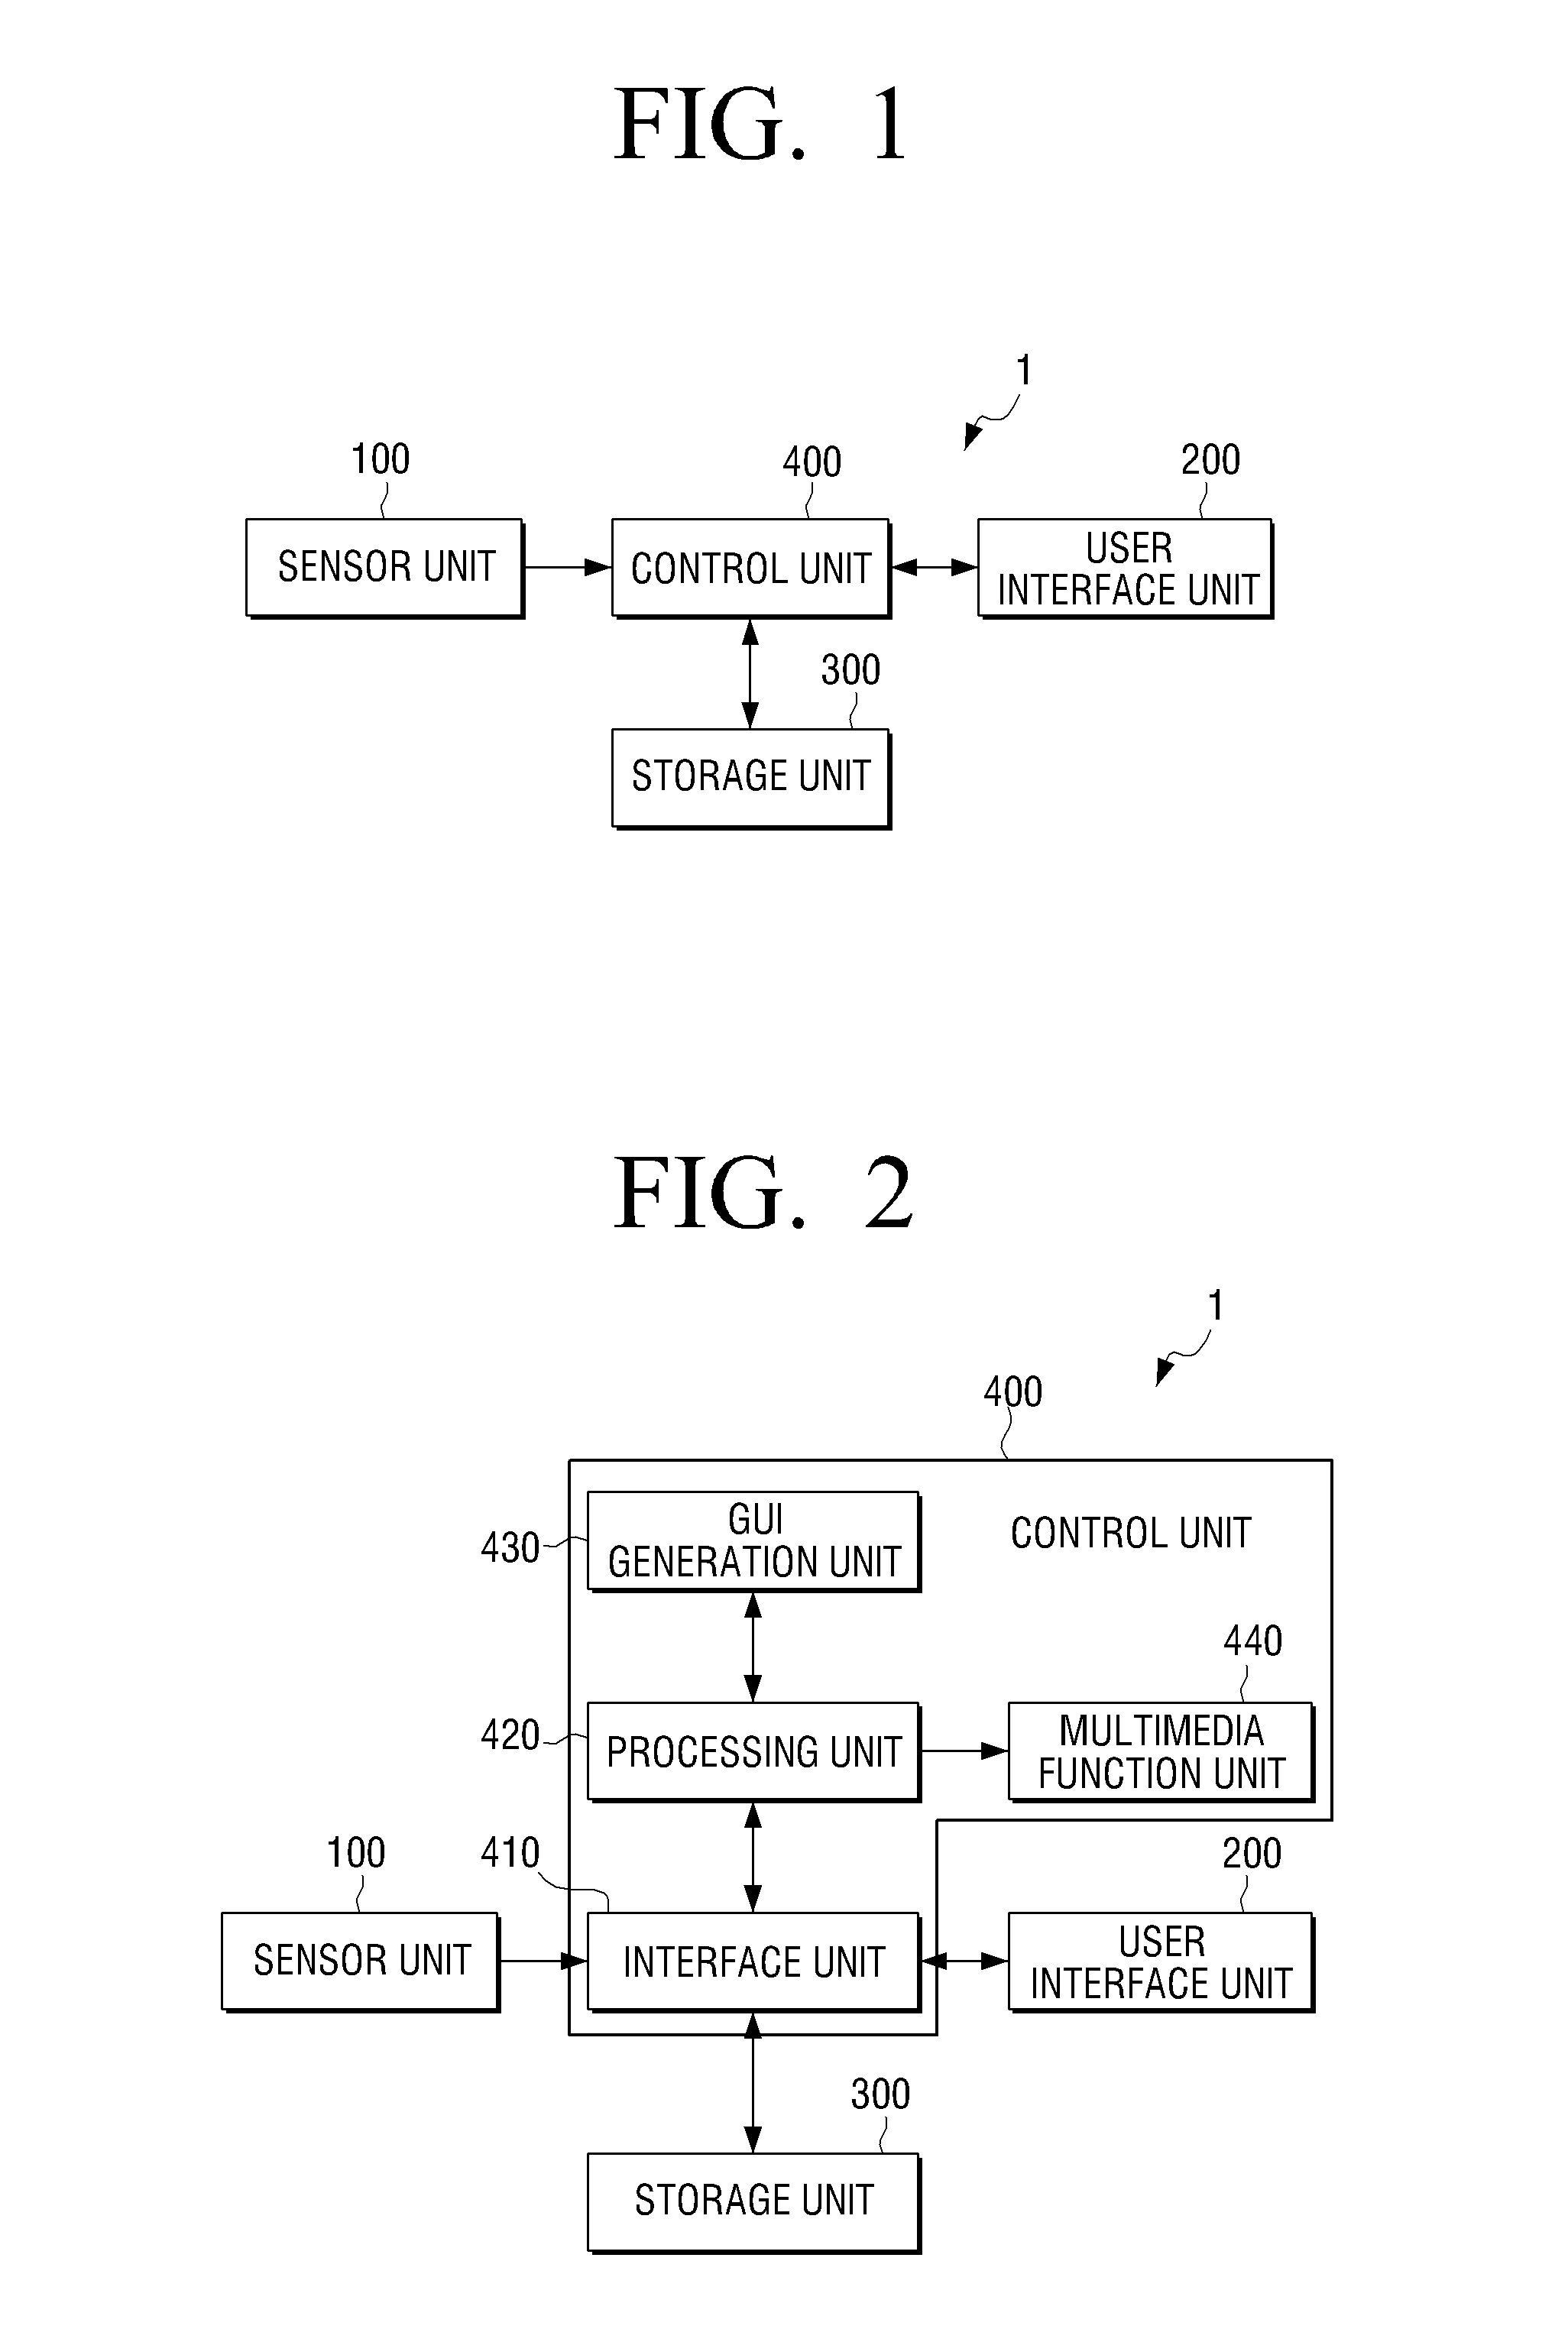 Method and apparatus for editing touch display